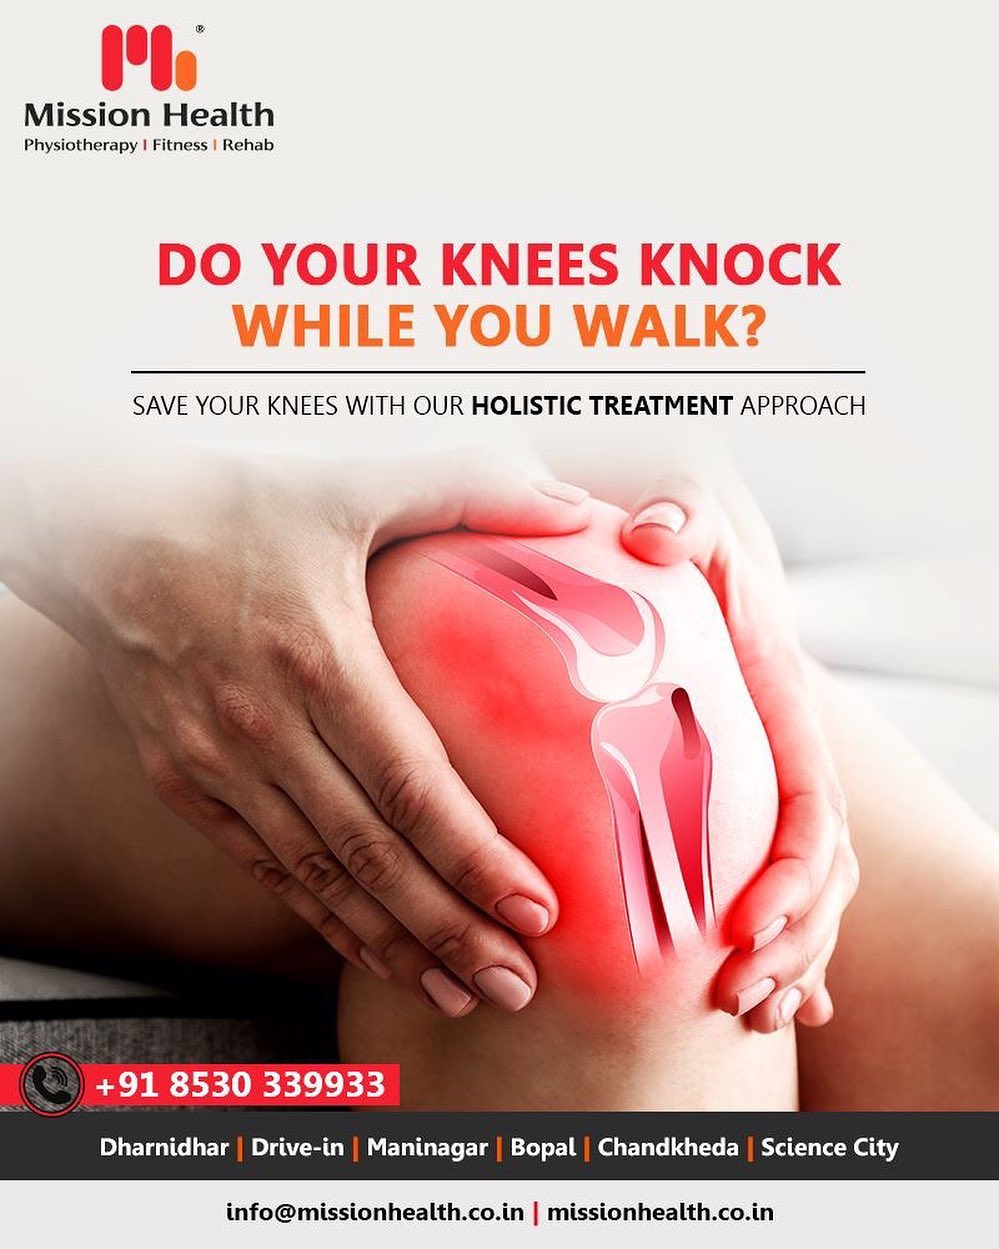 Do you have pain in your Knee while walking? Save your Knee with our advanced Rehabilitation Strategies.

#MissionHealth #MissionHealthIndia #fitnessgoals #MovementIsLife #PersonalTraining #weightmanagement #fitness